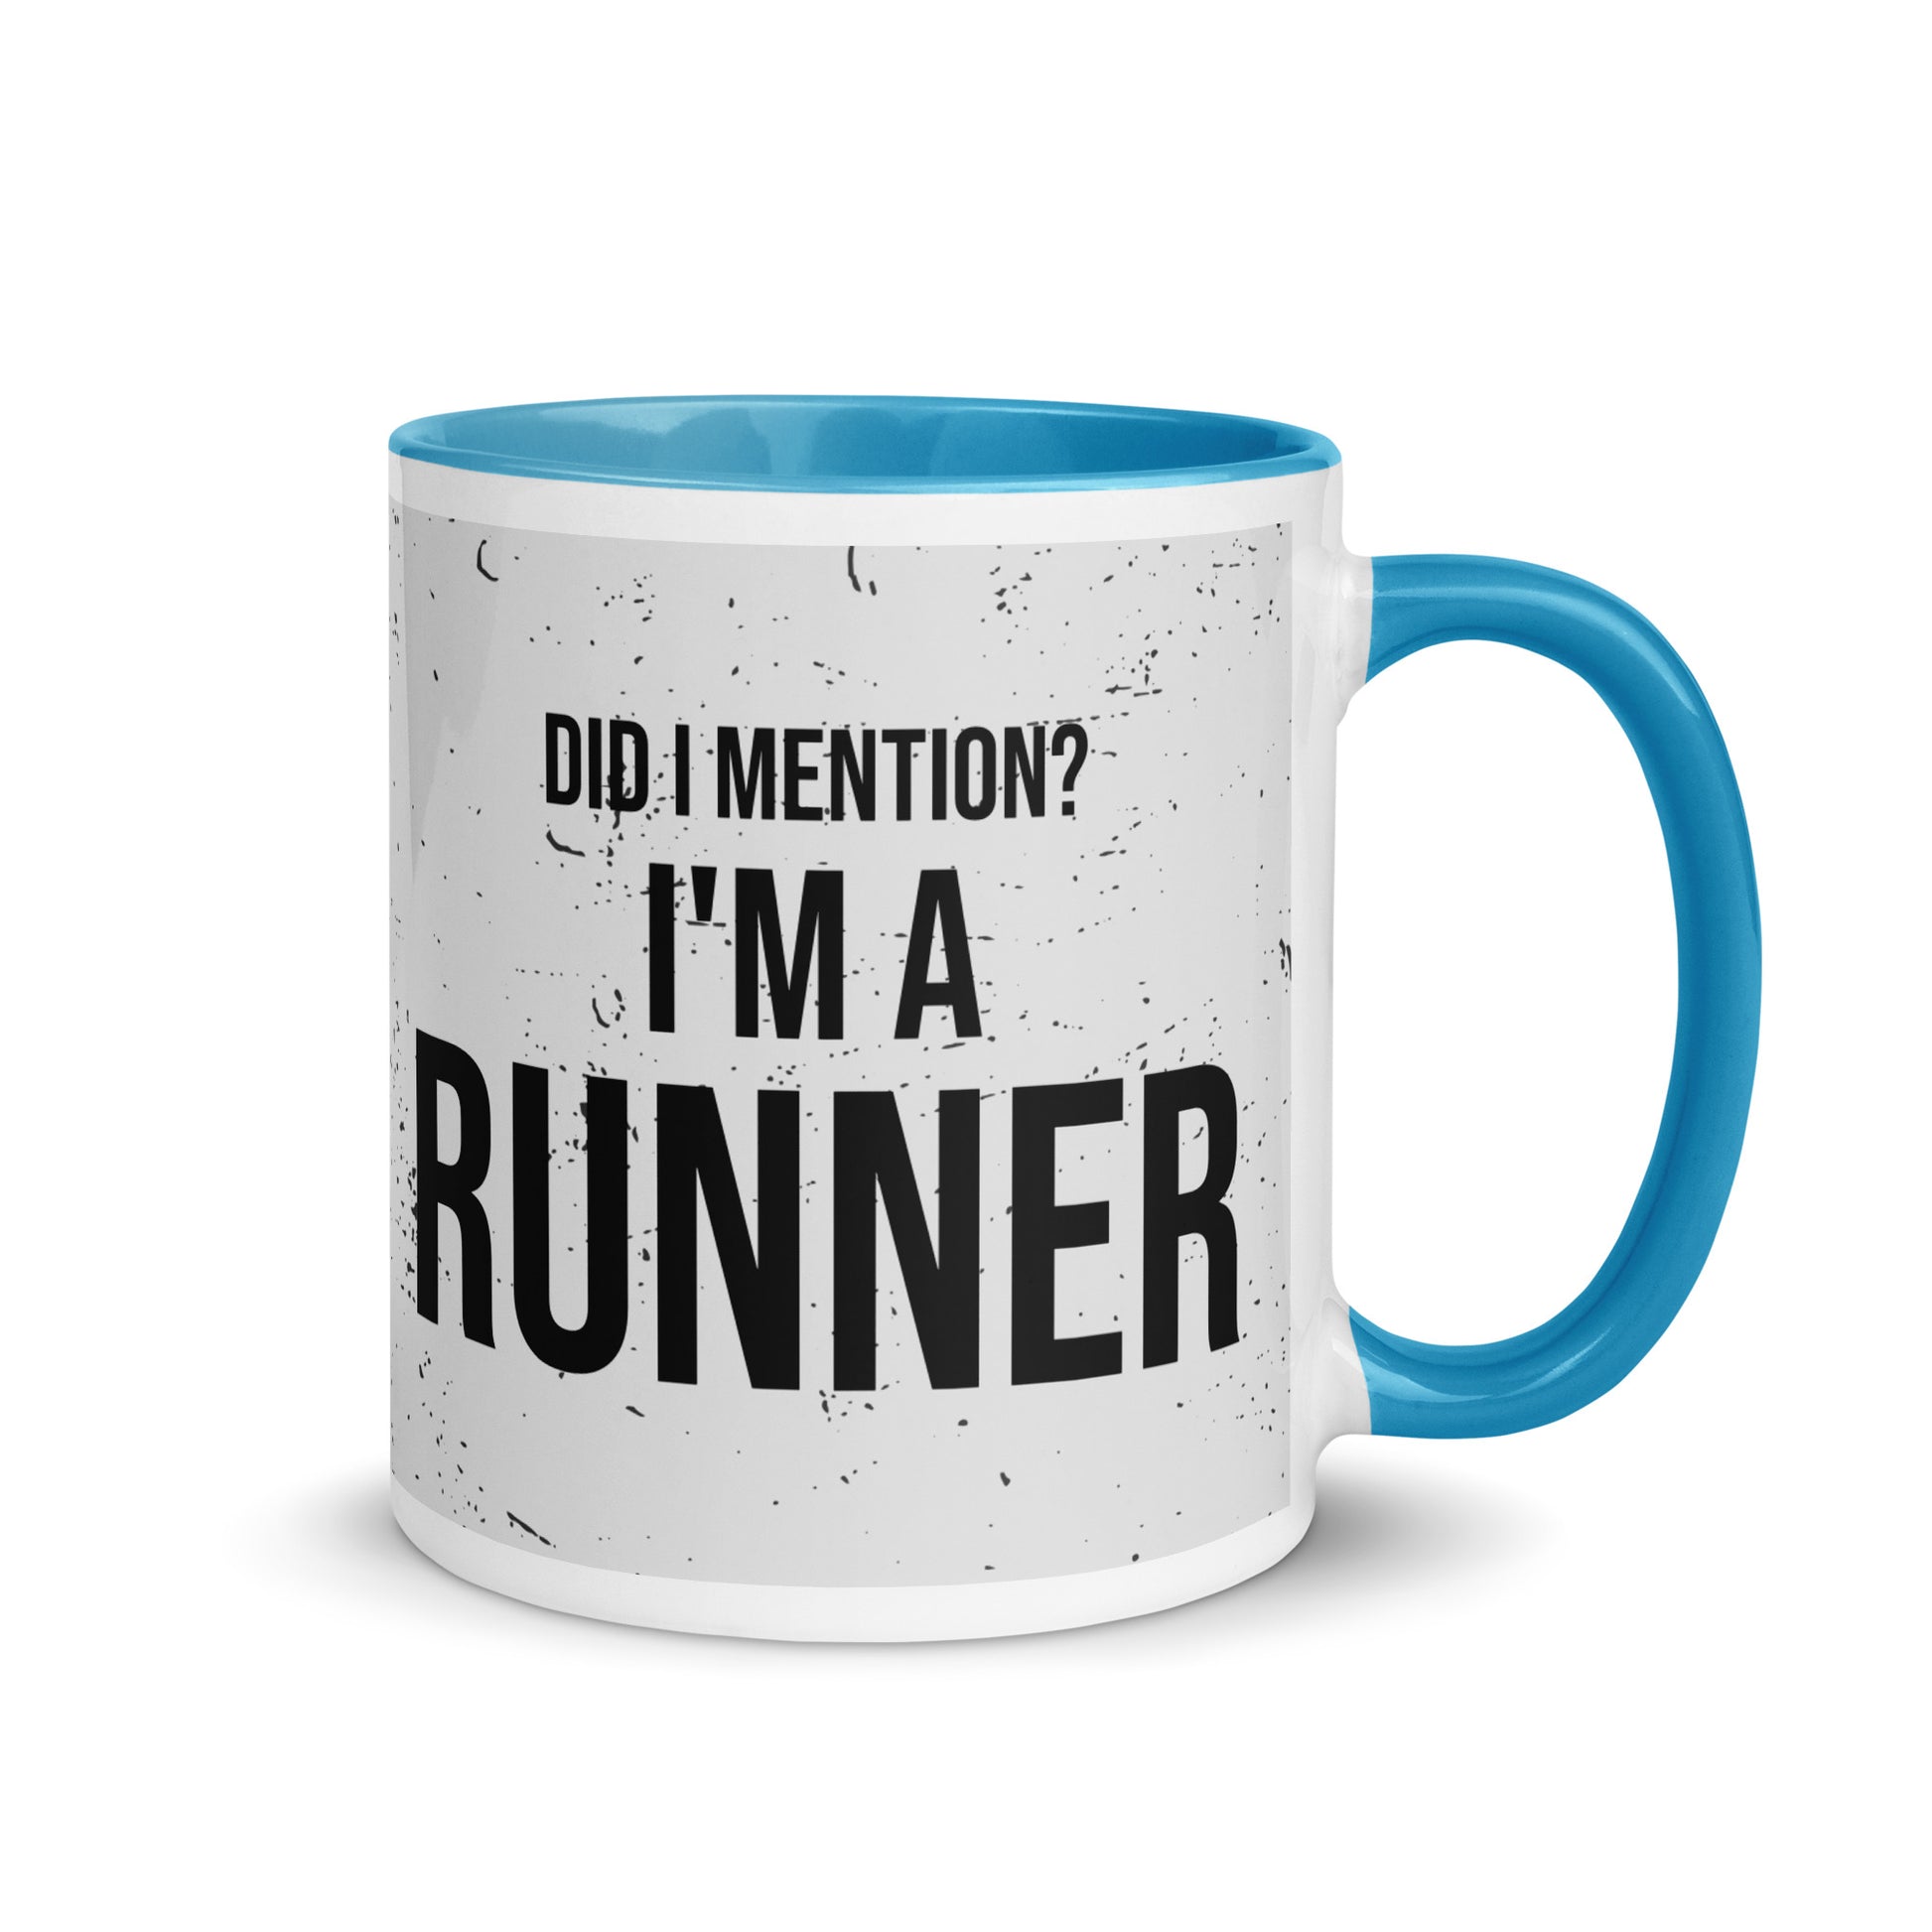 Mug with blue handle and a grey splatter print design with the phrase did I mention? I'm a runner across the front. A nice gift for a running friend. 